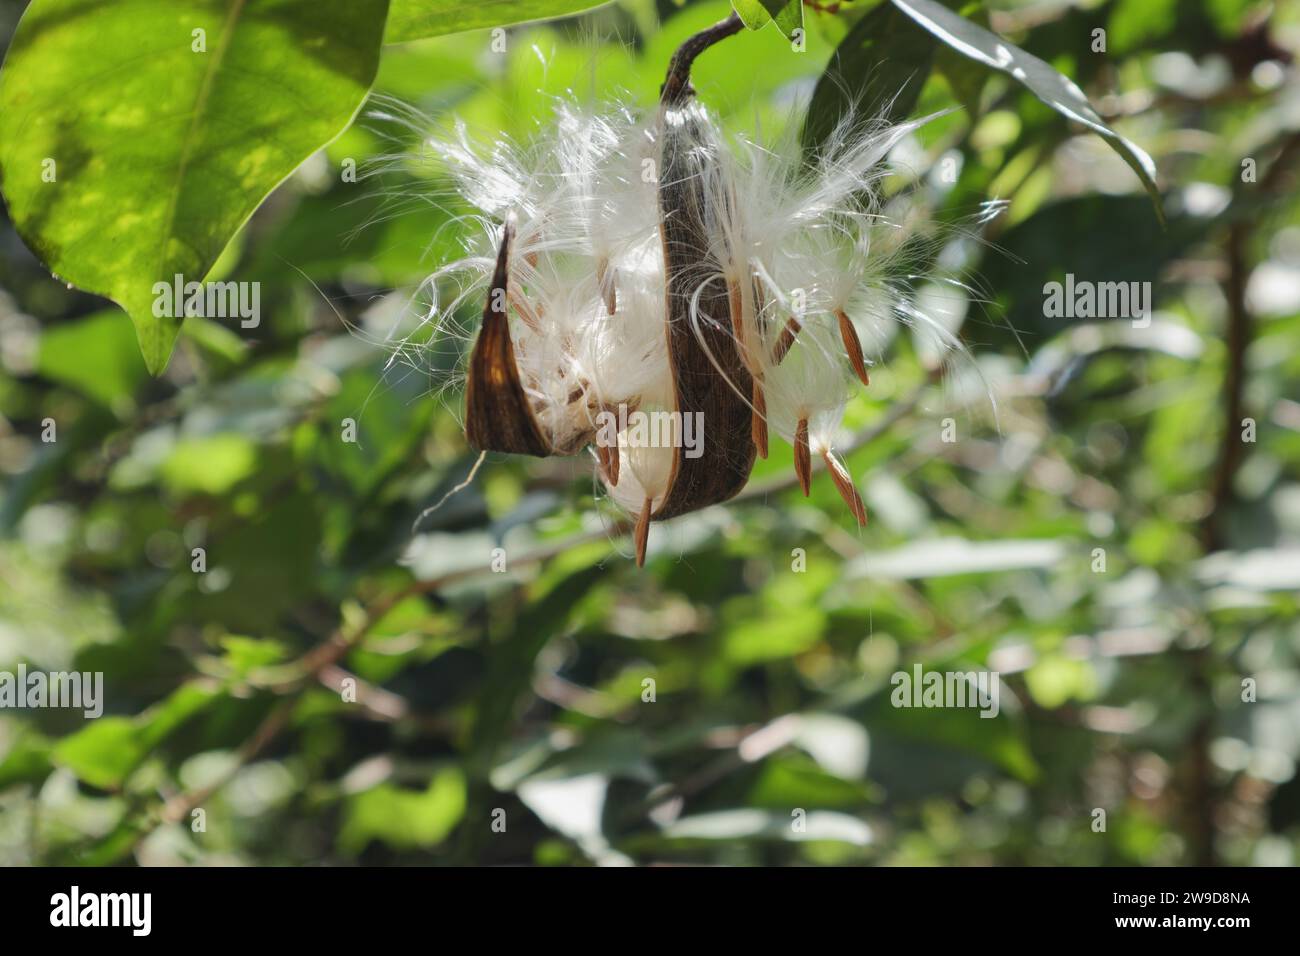 Side view of a coral swirl (Wrightia antidysenterica) seed capsule that has dried out and is open. These are seeds with silky furry feathers that are Stock Photo